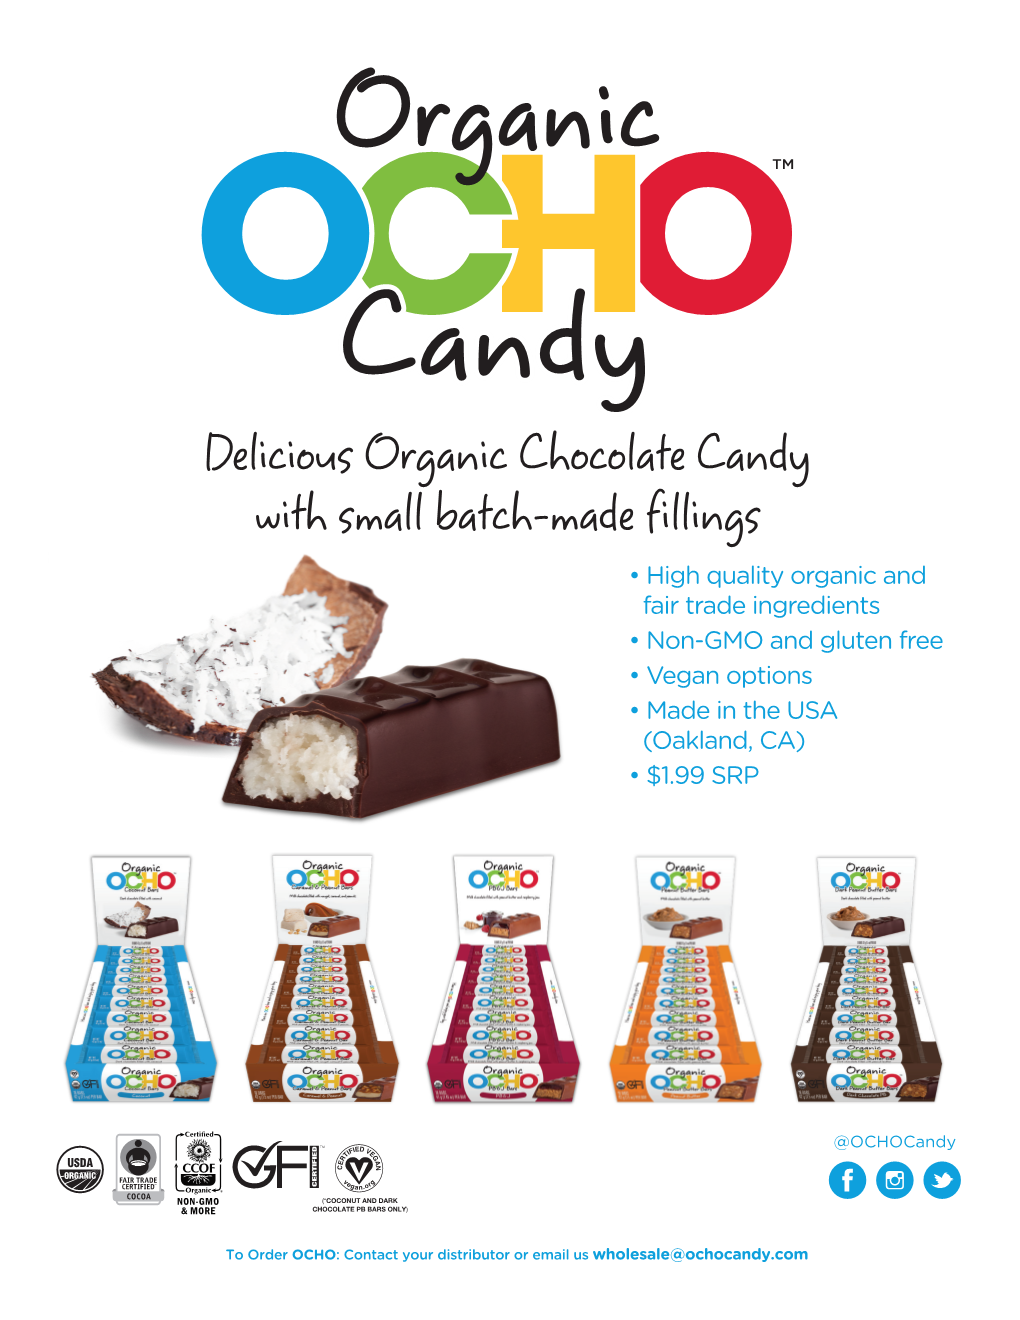 Delicious Organic Chocolate Candy with Small Batch-Made Fillings